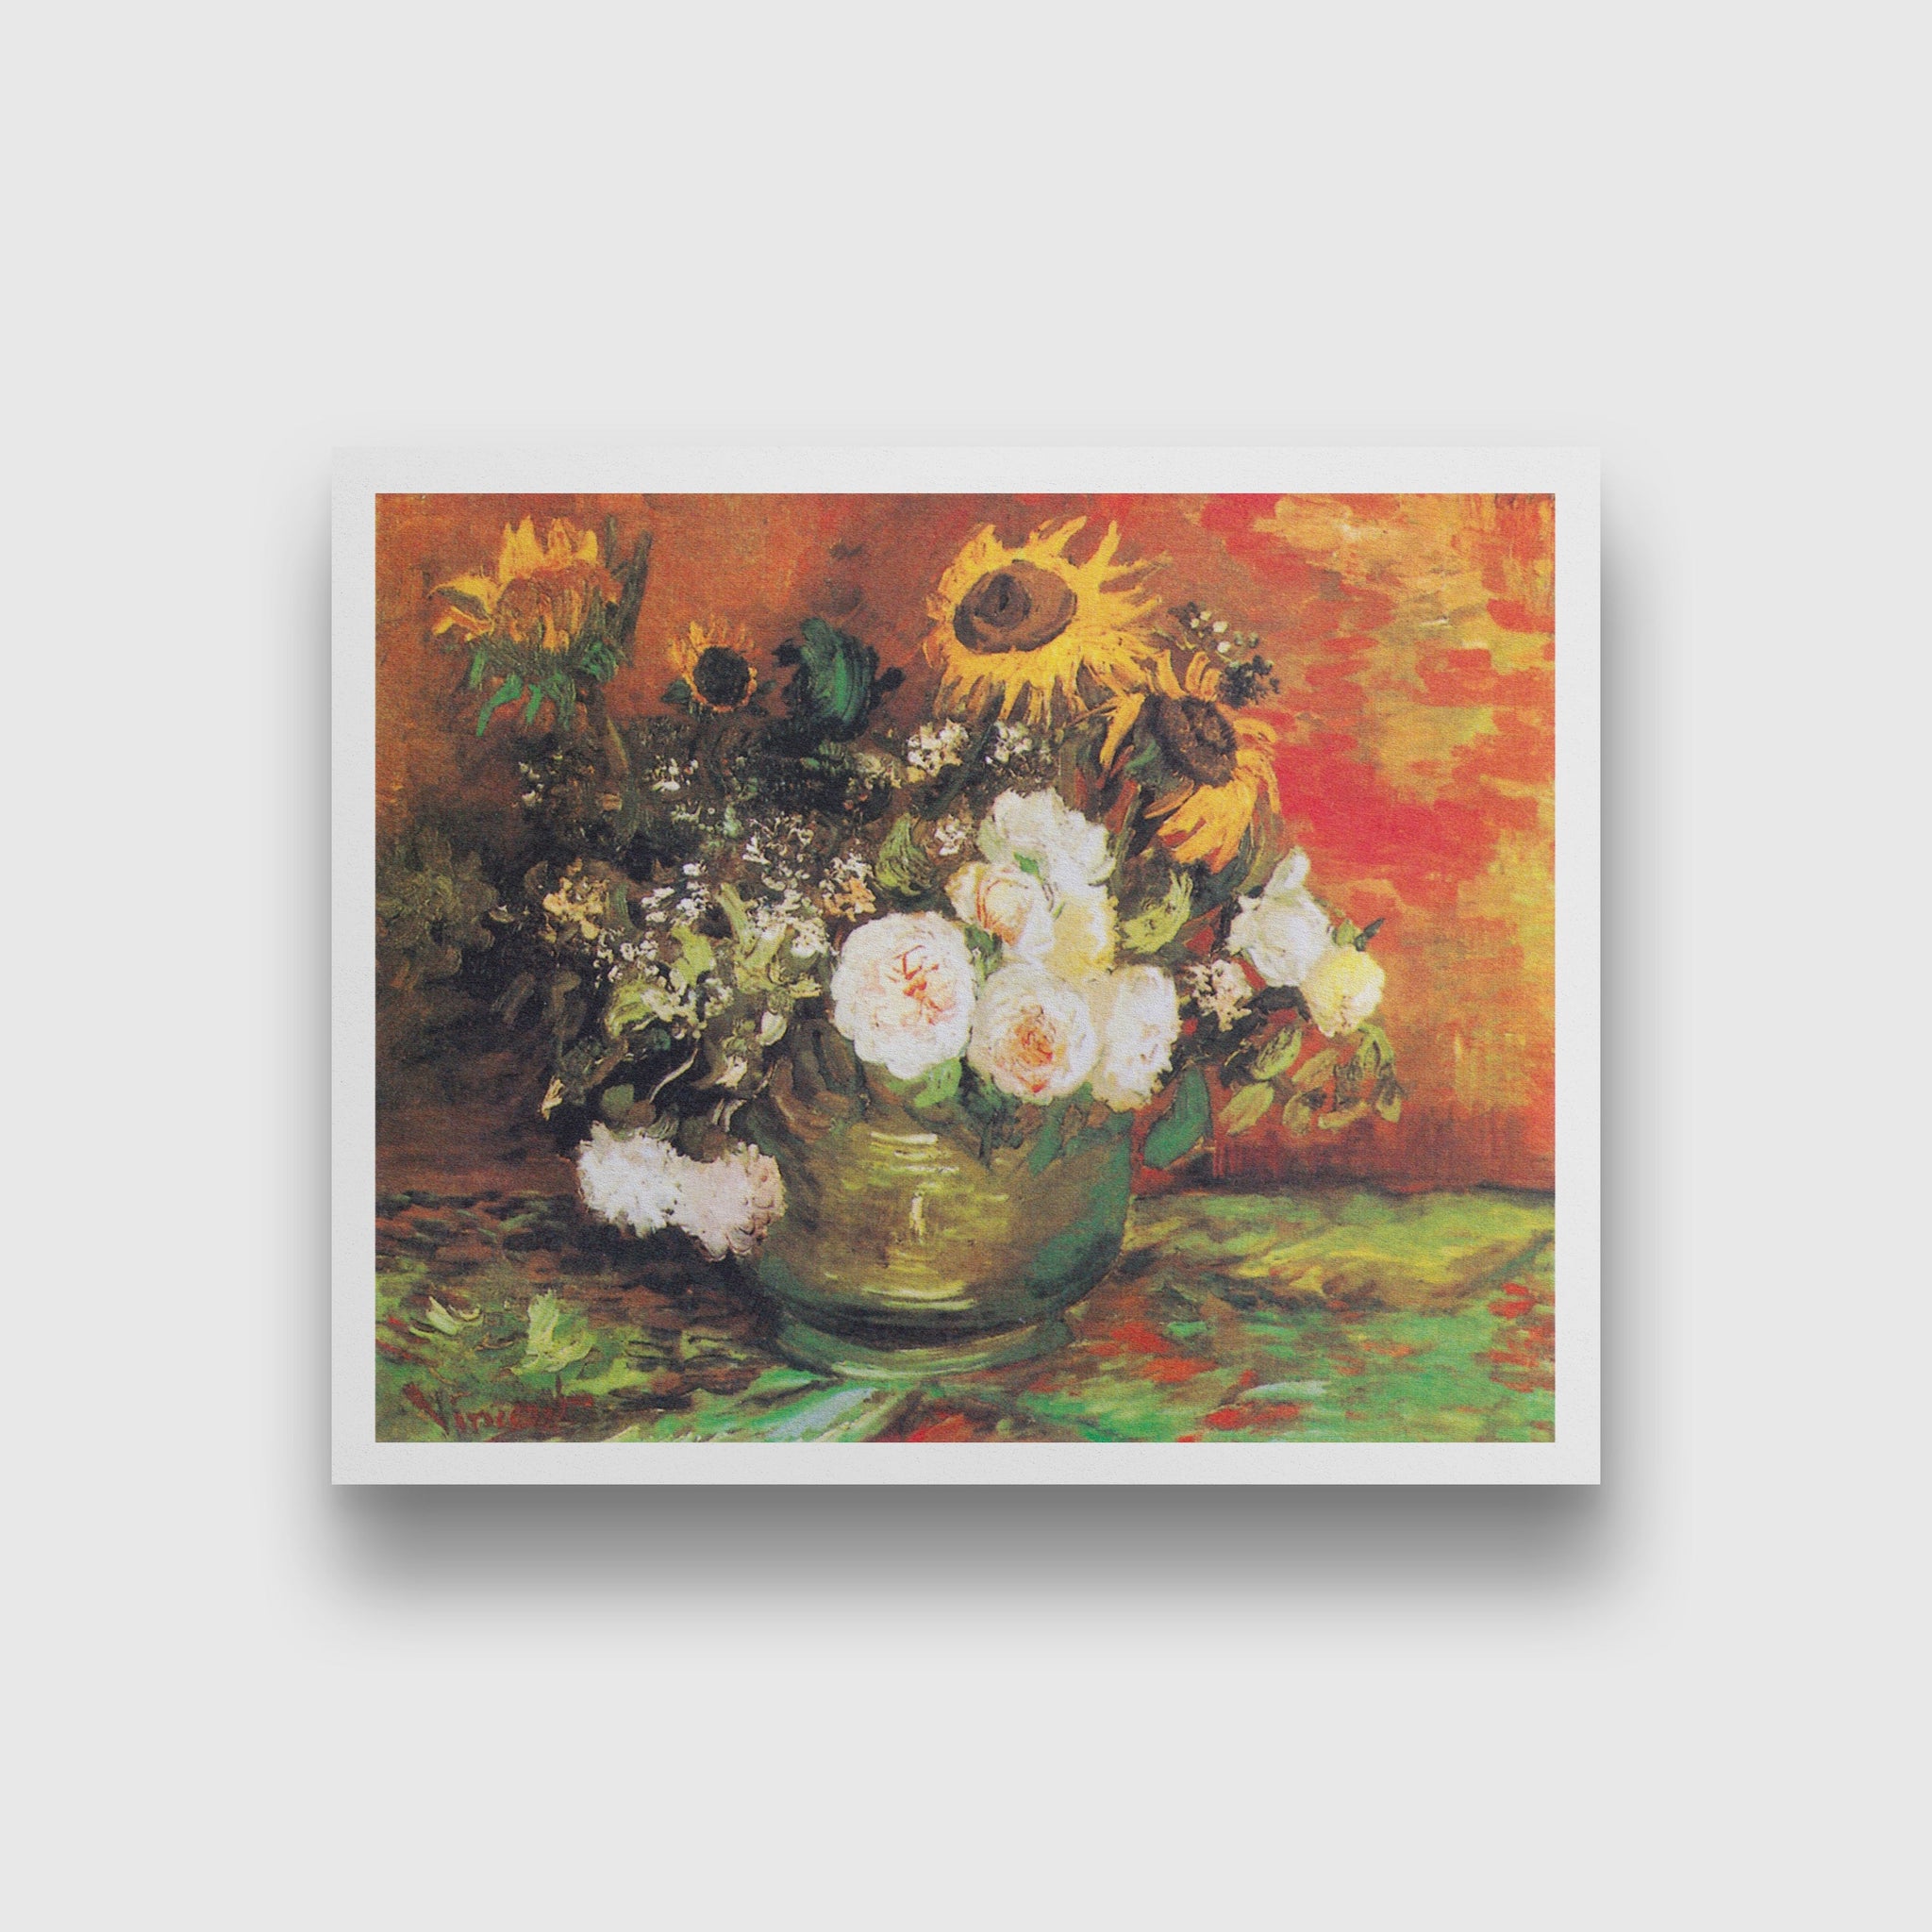 Bowl With Sunflowers Roses And Other Flowers (1886) famous painting